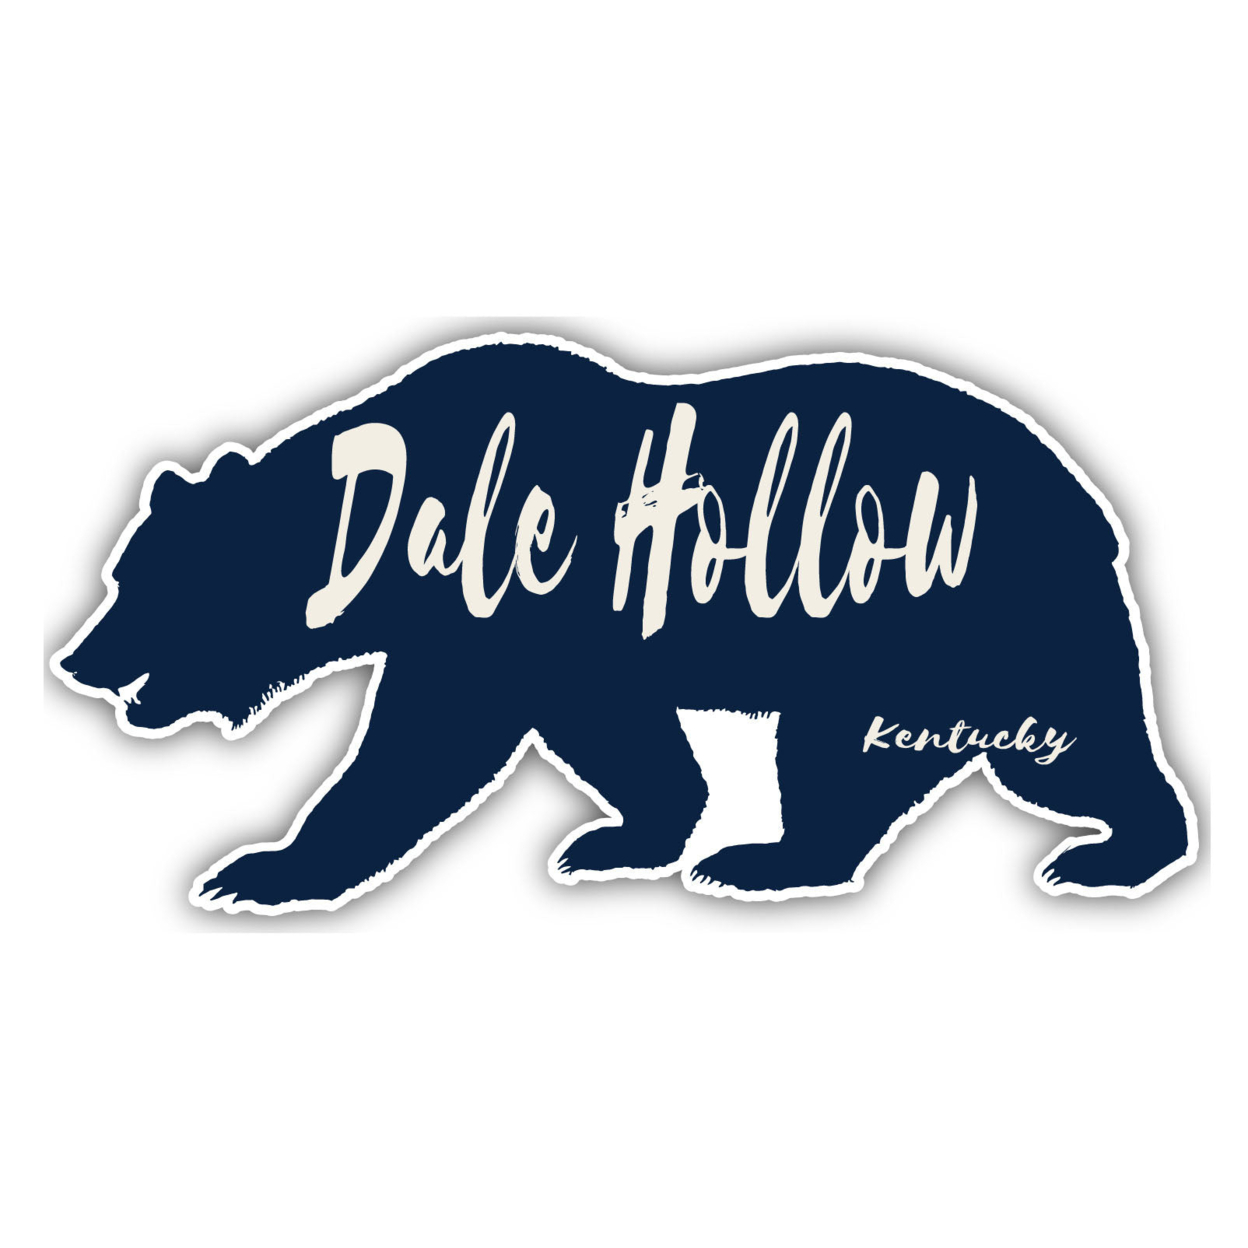 Dale Hollow Kentucky Souvenir Decorative Stickers (Choose Theme And Size) - 4-Pack, 10-Inch, Bear